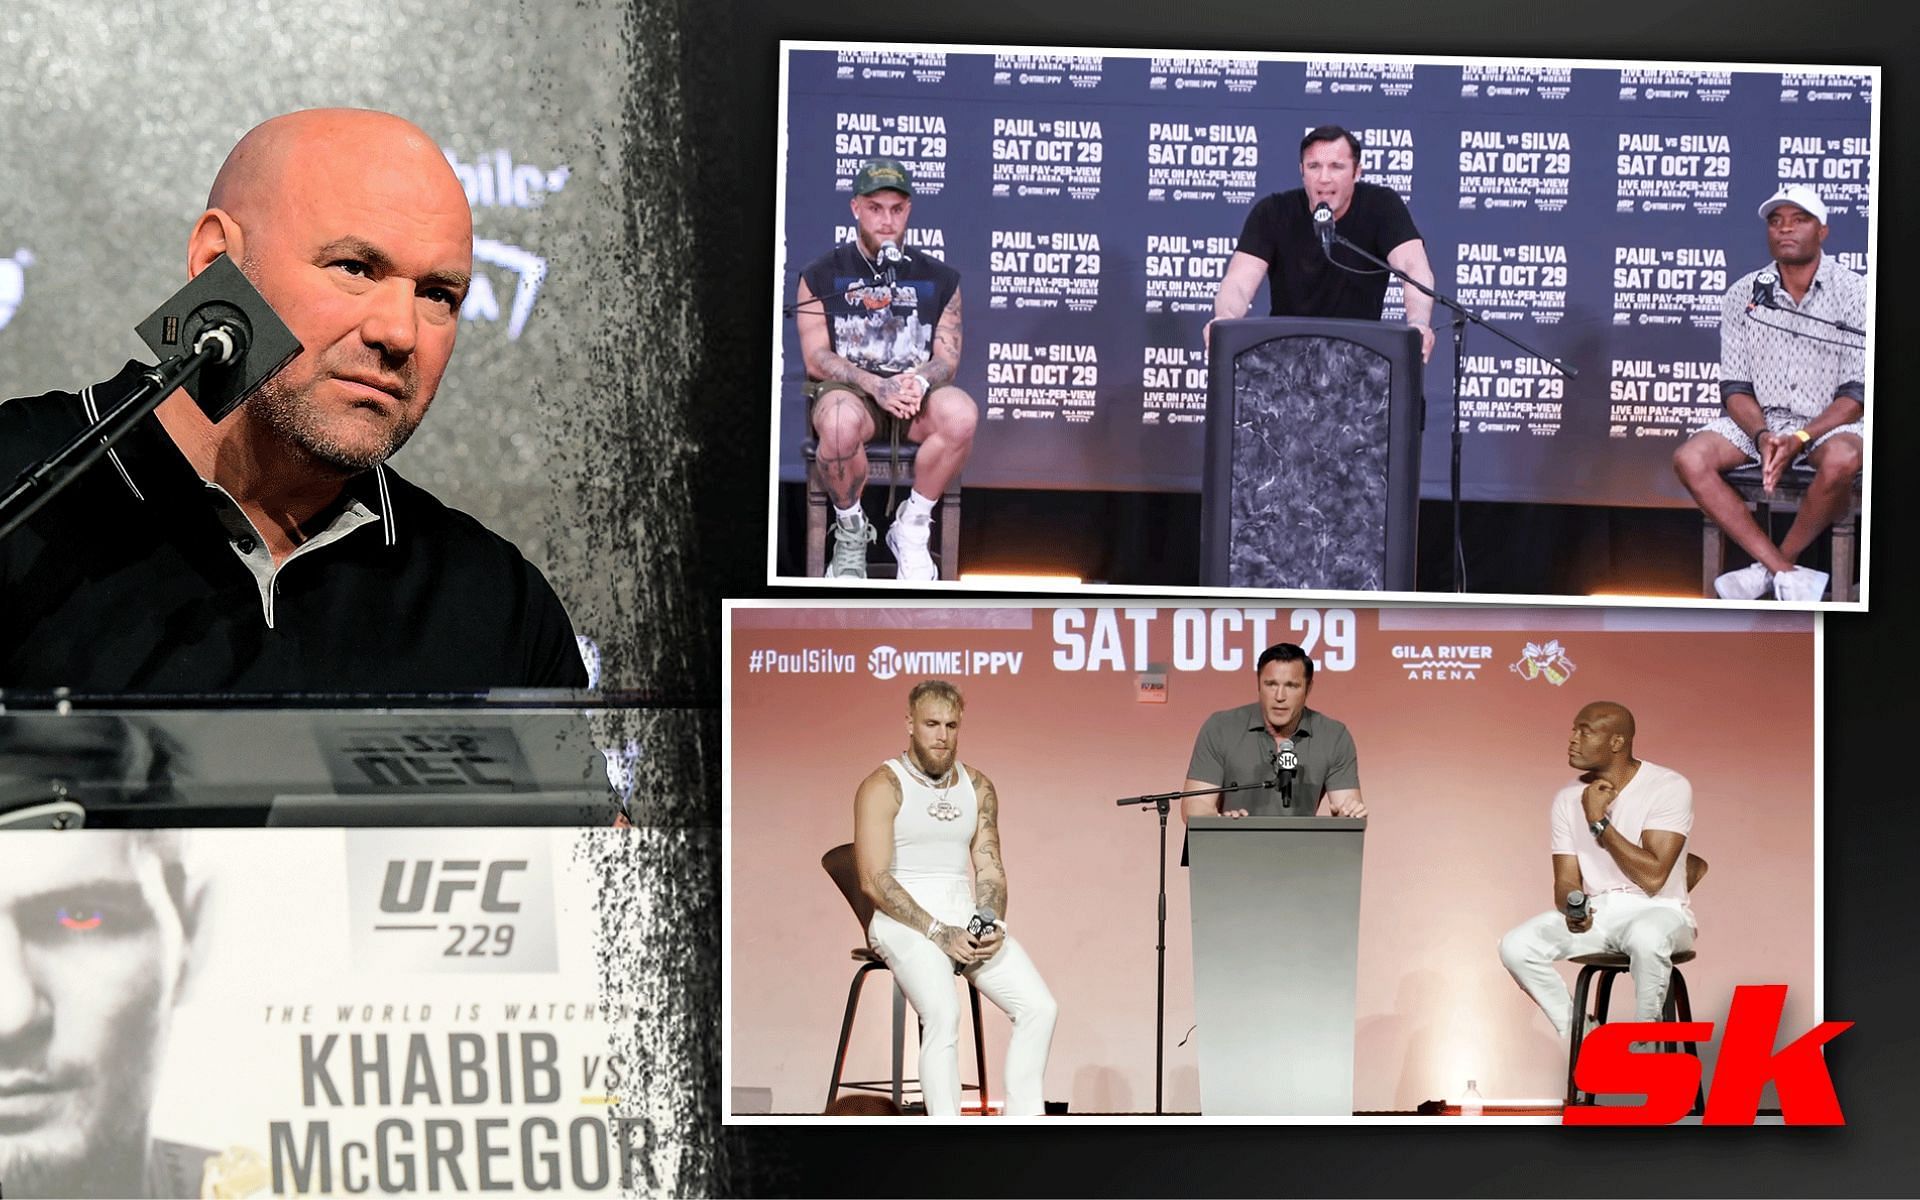 Dana White (left), Jake Paul, Chael Sonnen and Anderson Silva (top right)[Image courtesy: @themaclife on YouTube] Paul, Sonnen and Silva (bottom right)[Image courtesy: @mmafighting on YouTube]